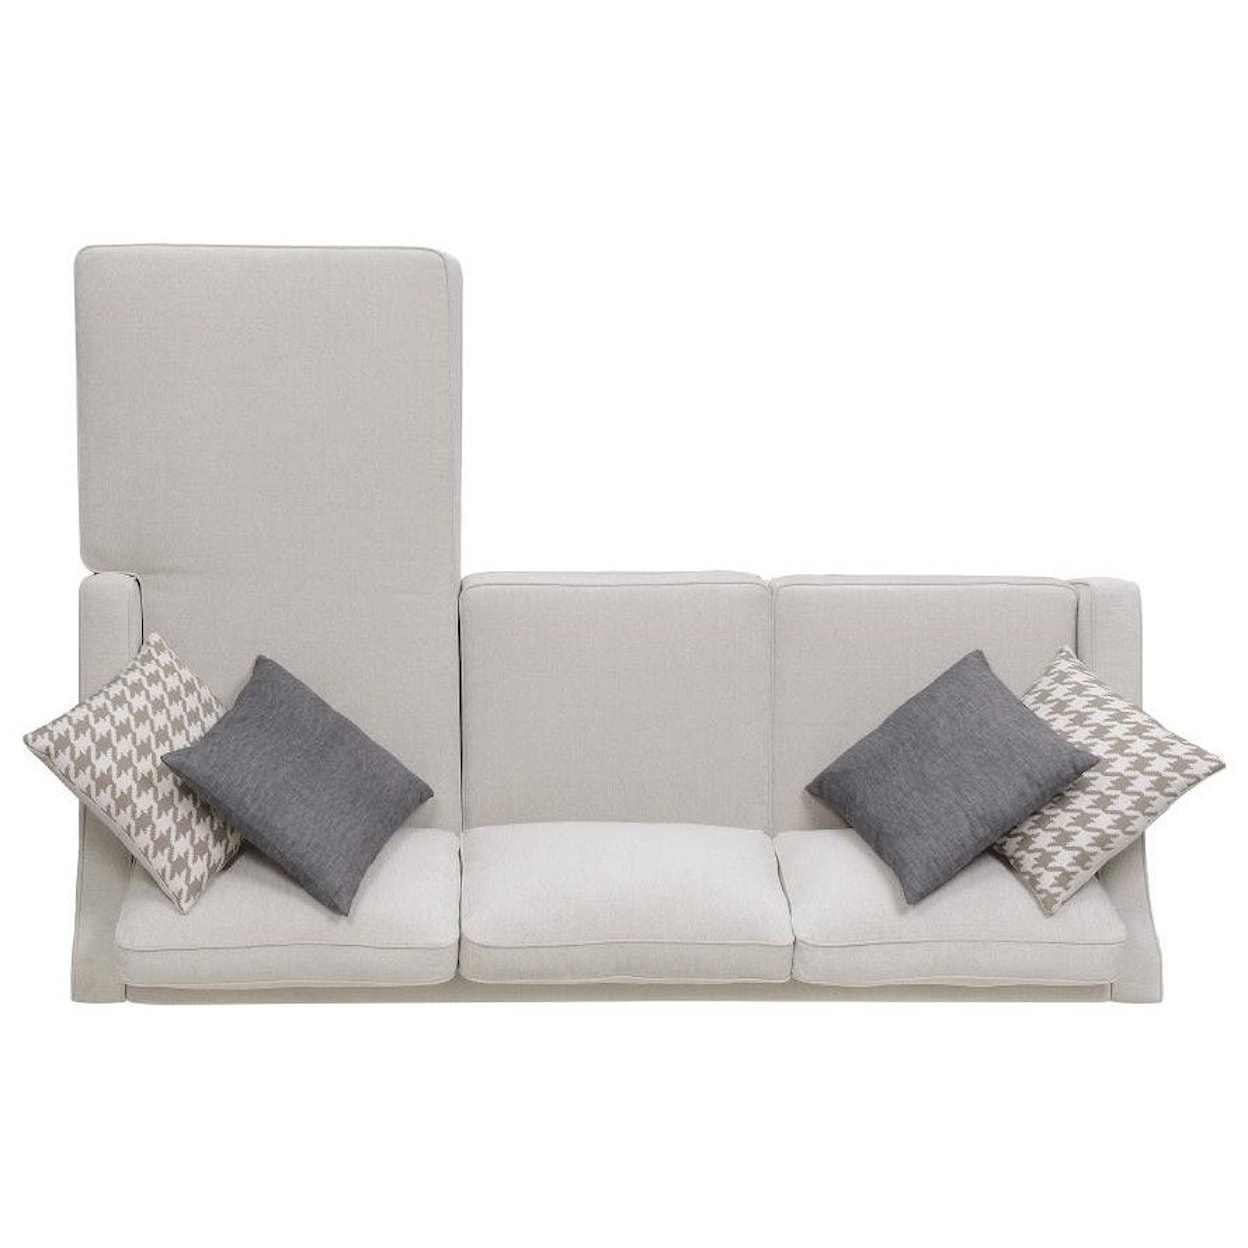 Coaster McLoughlin Sectional with Reversible Chaise